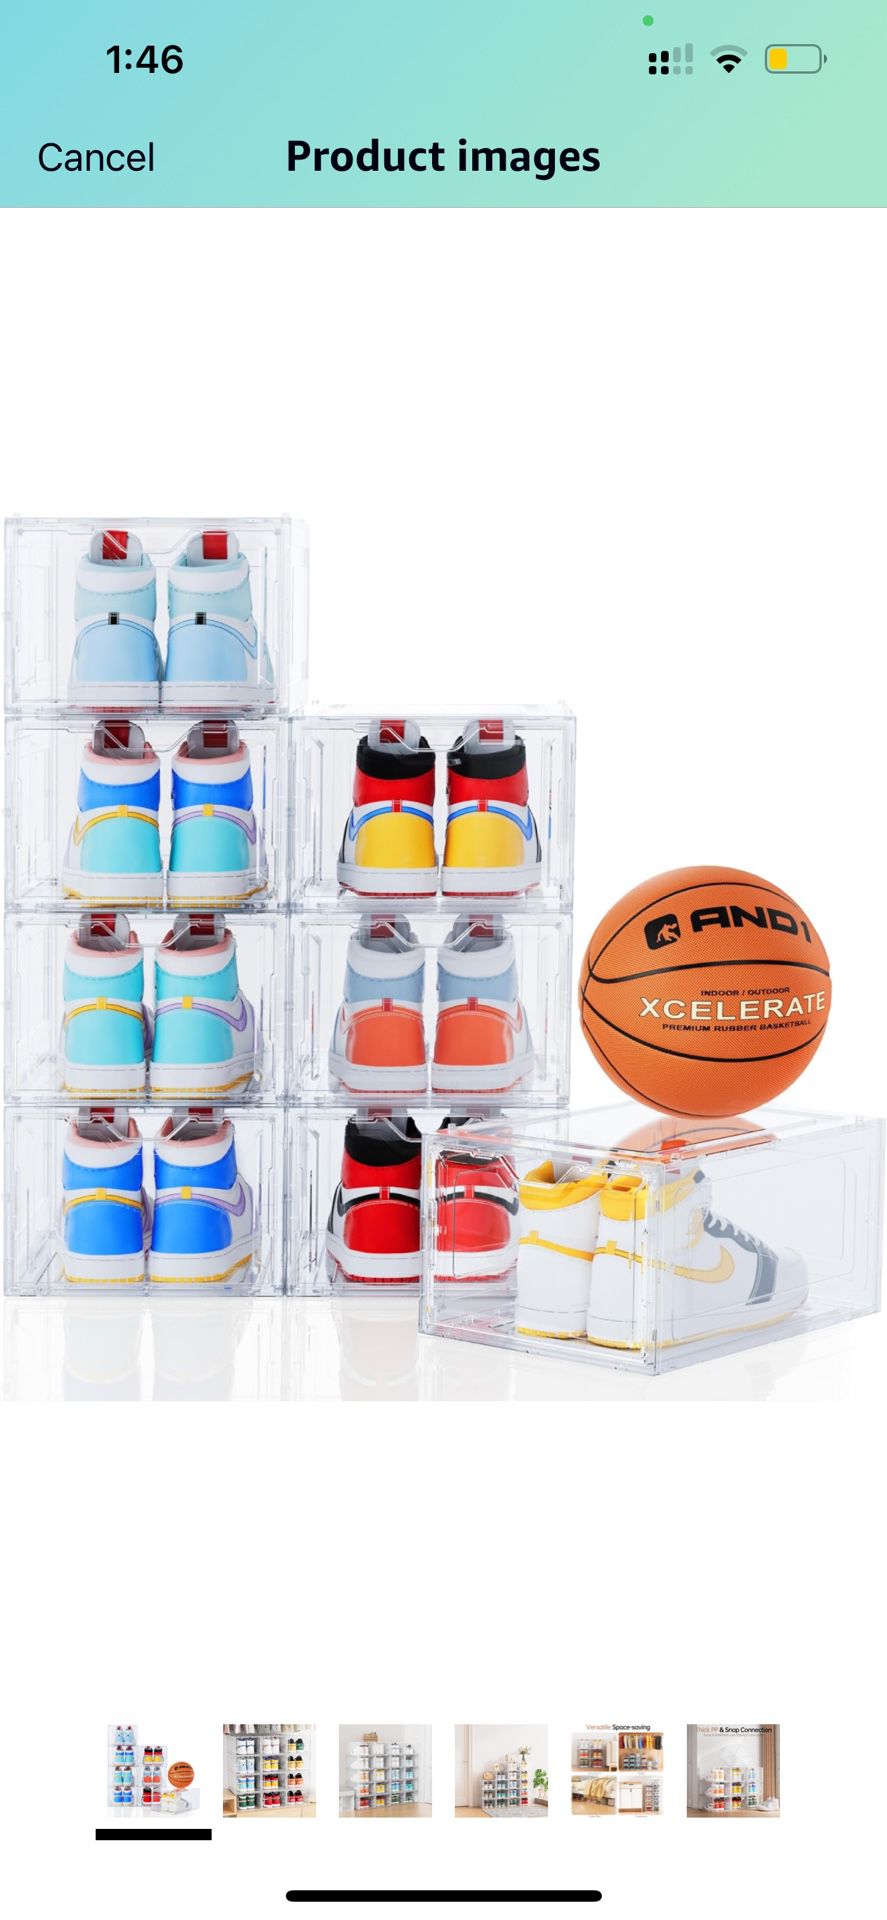 8-Pack Thicken & Stackable Shoe Storage Boxes with Magnetic Door, Clear & Sturdy Plastic Organizer for Closet, Space-Saving Sneaker & Boot Disp